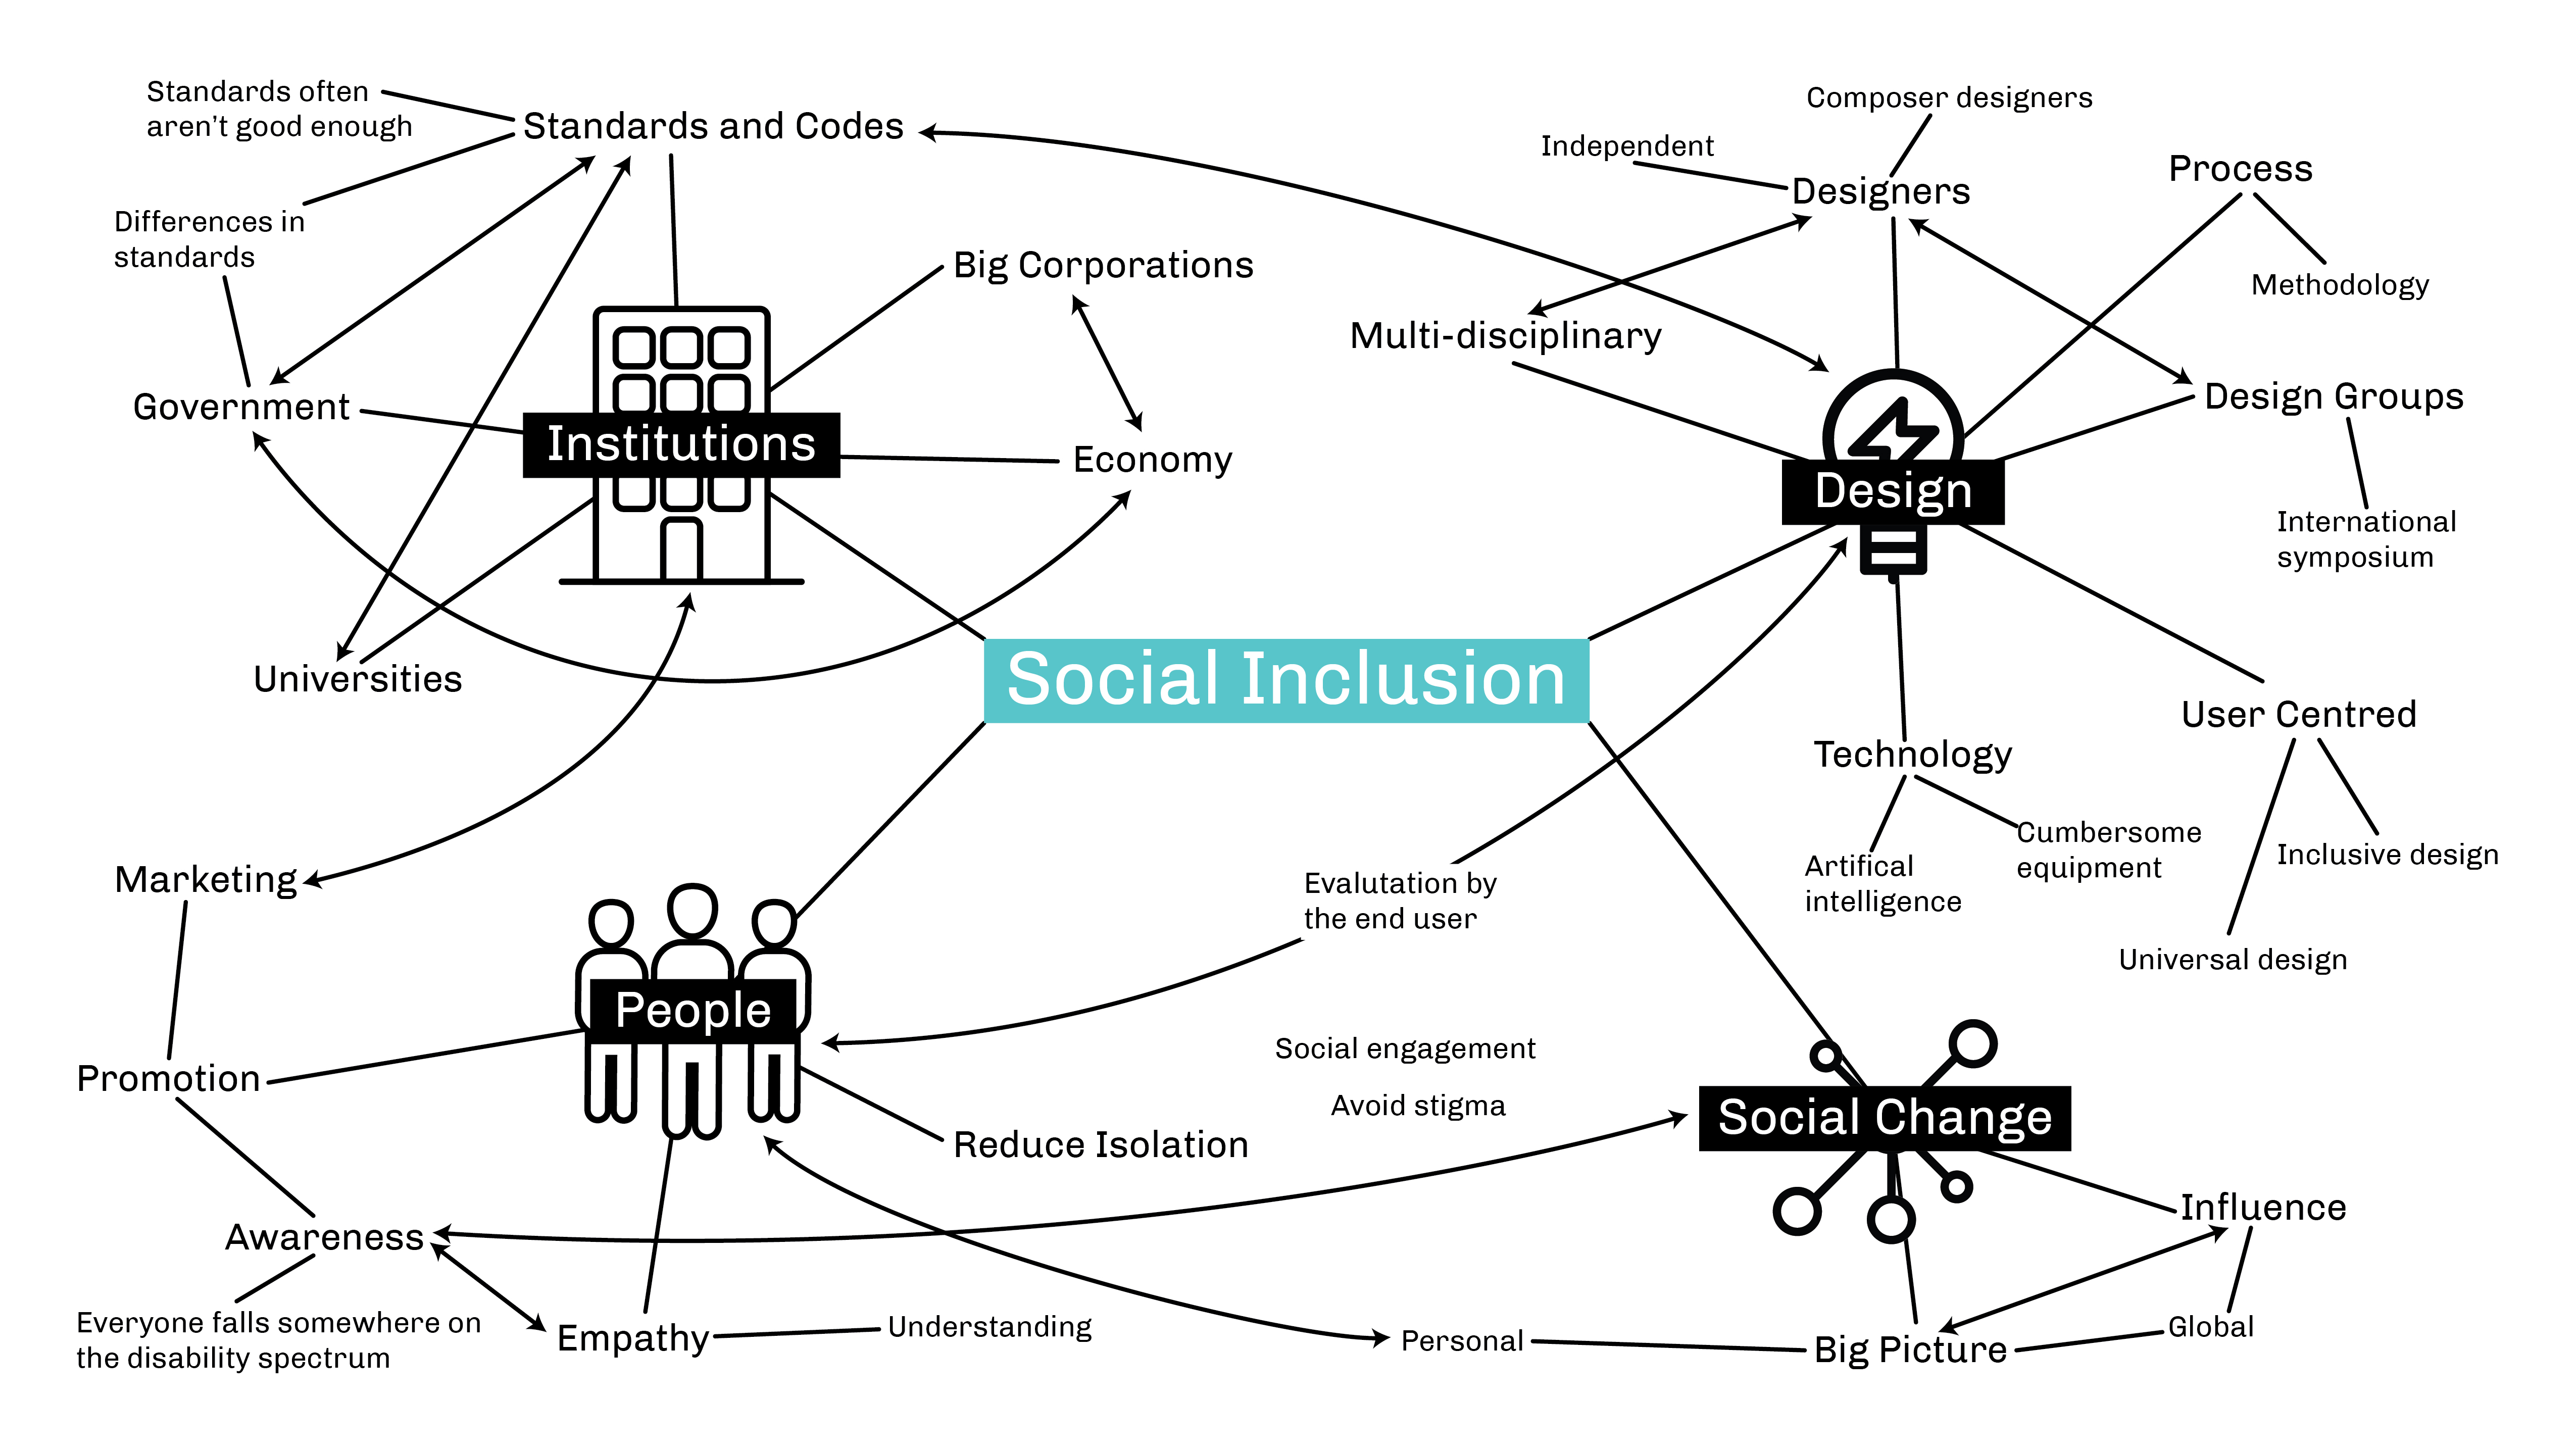 Image of mind map from interview analysis featuring people, social change, design and institutions